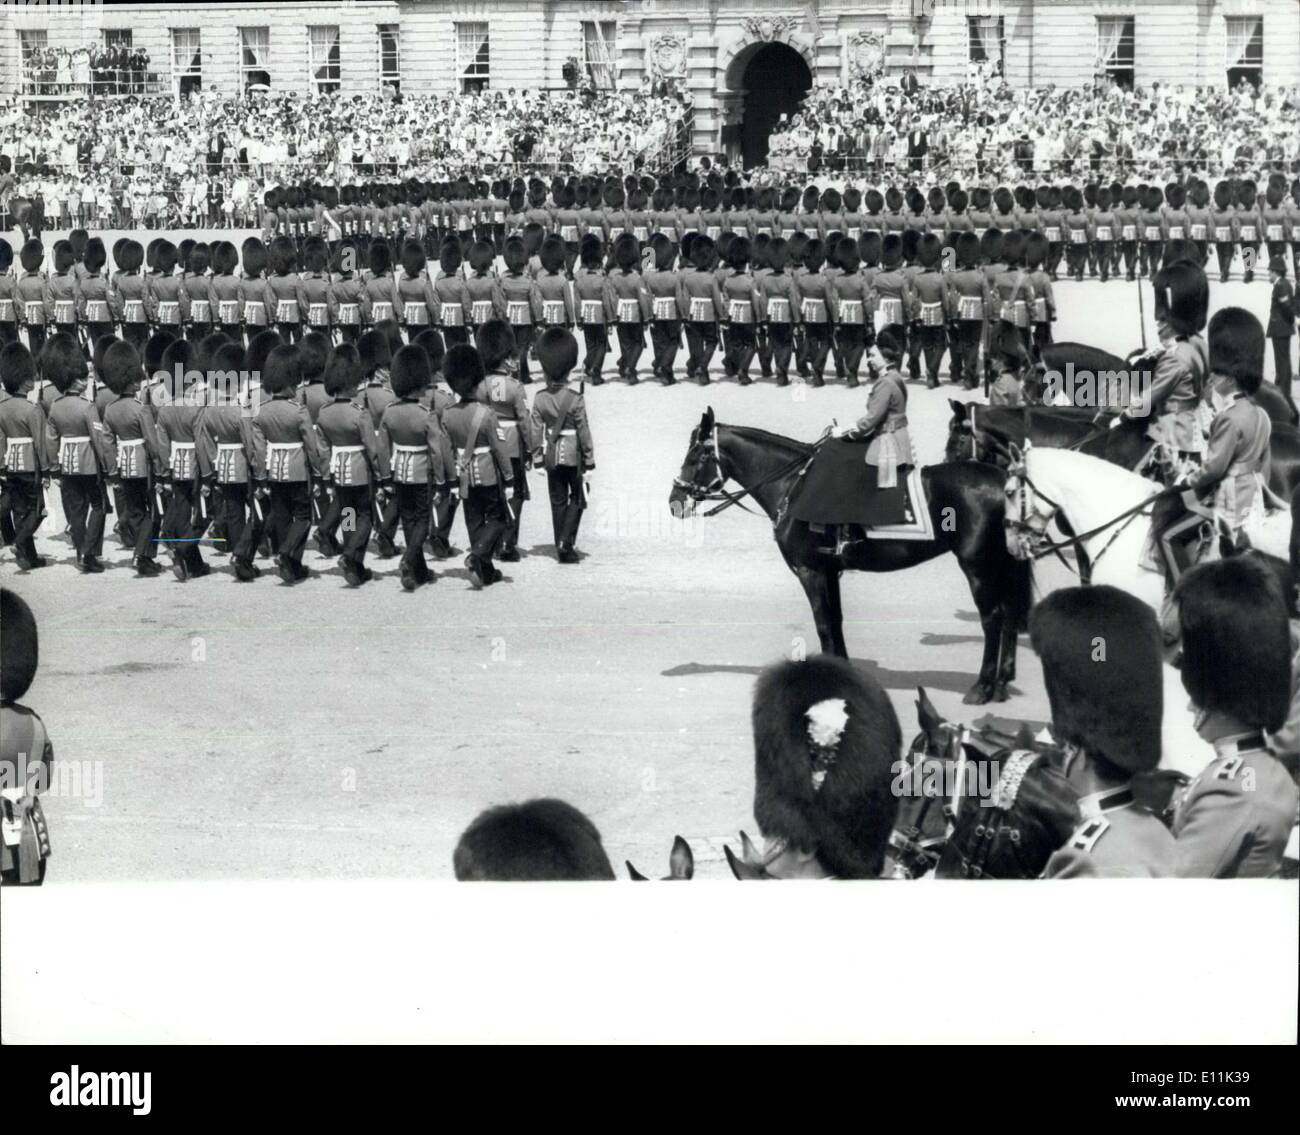 Jun. 03, 1978 - Trooping the colour ceremony: The annual Trooping the Colour Ceremony took place today to mark the official birthday of H.M. The Queen on Horse Guards Parade. The Colour Trooped was that of the 2nd Battalion Grenadier Guards. Photo shows Queen Elizabeth 11 on her horse 'Burmese' watches the march past during the Trooping the Colour Ceremony on Horse Guards Parade today. Stock Photo